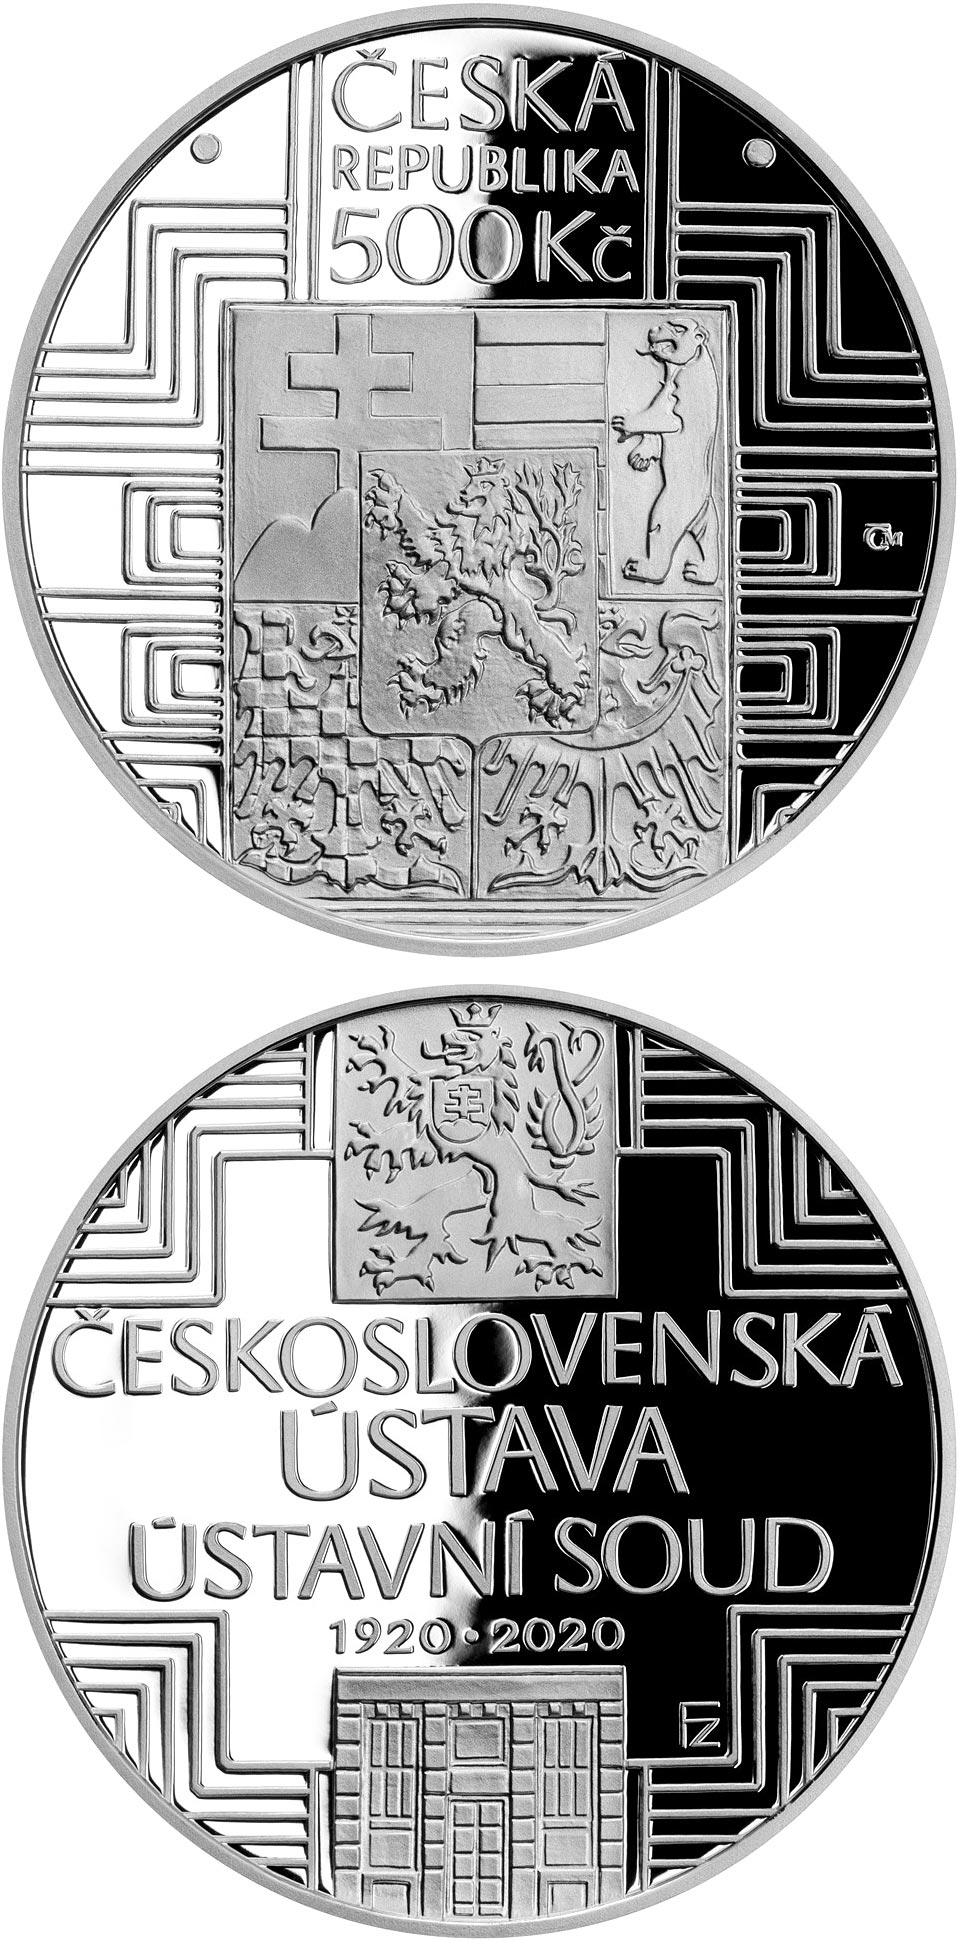 Image of 500 koruna coin - Adoption of Czechoslovak Constitution | Czech Republic 2020.  The Silver coin is of Proof, BU quality.